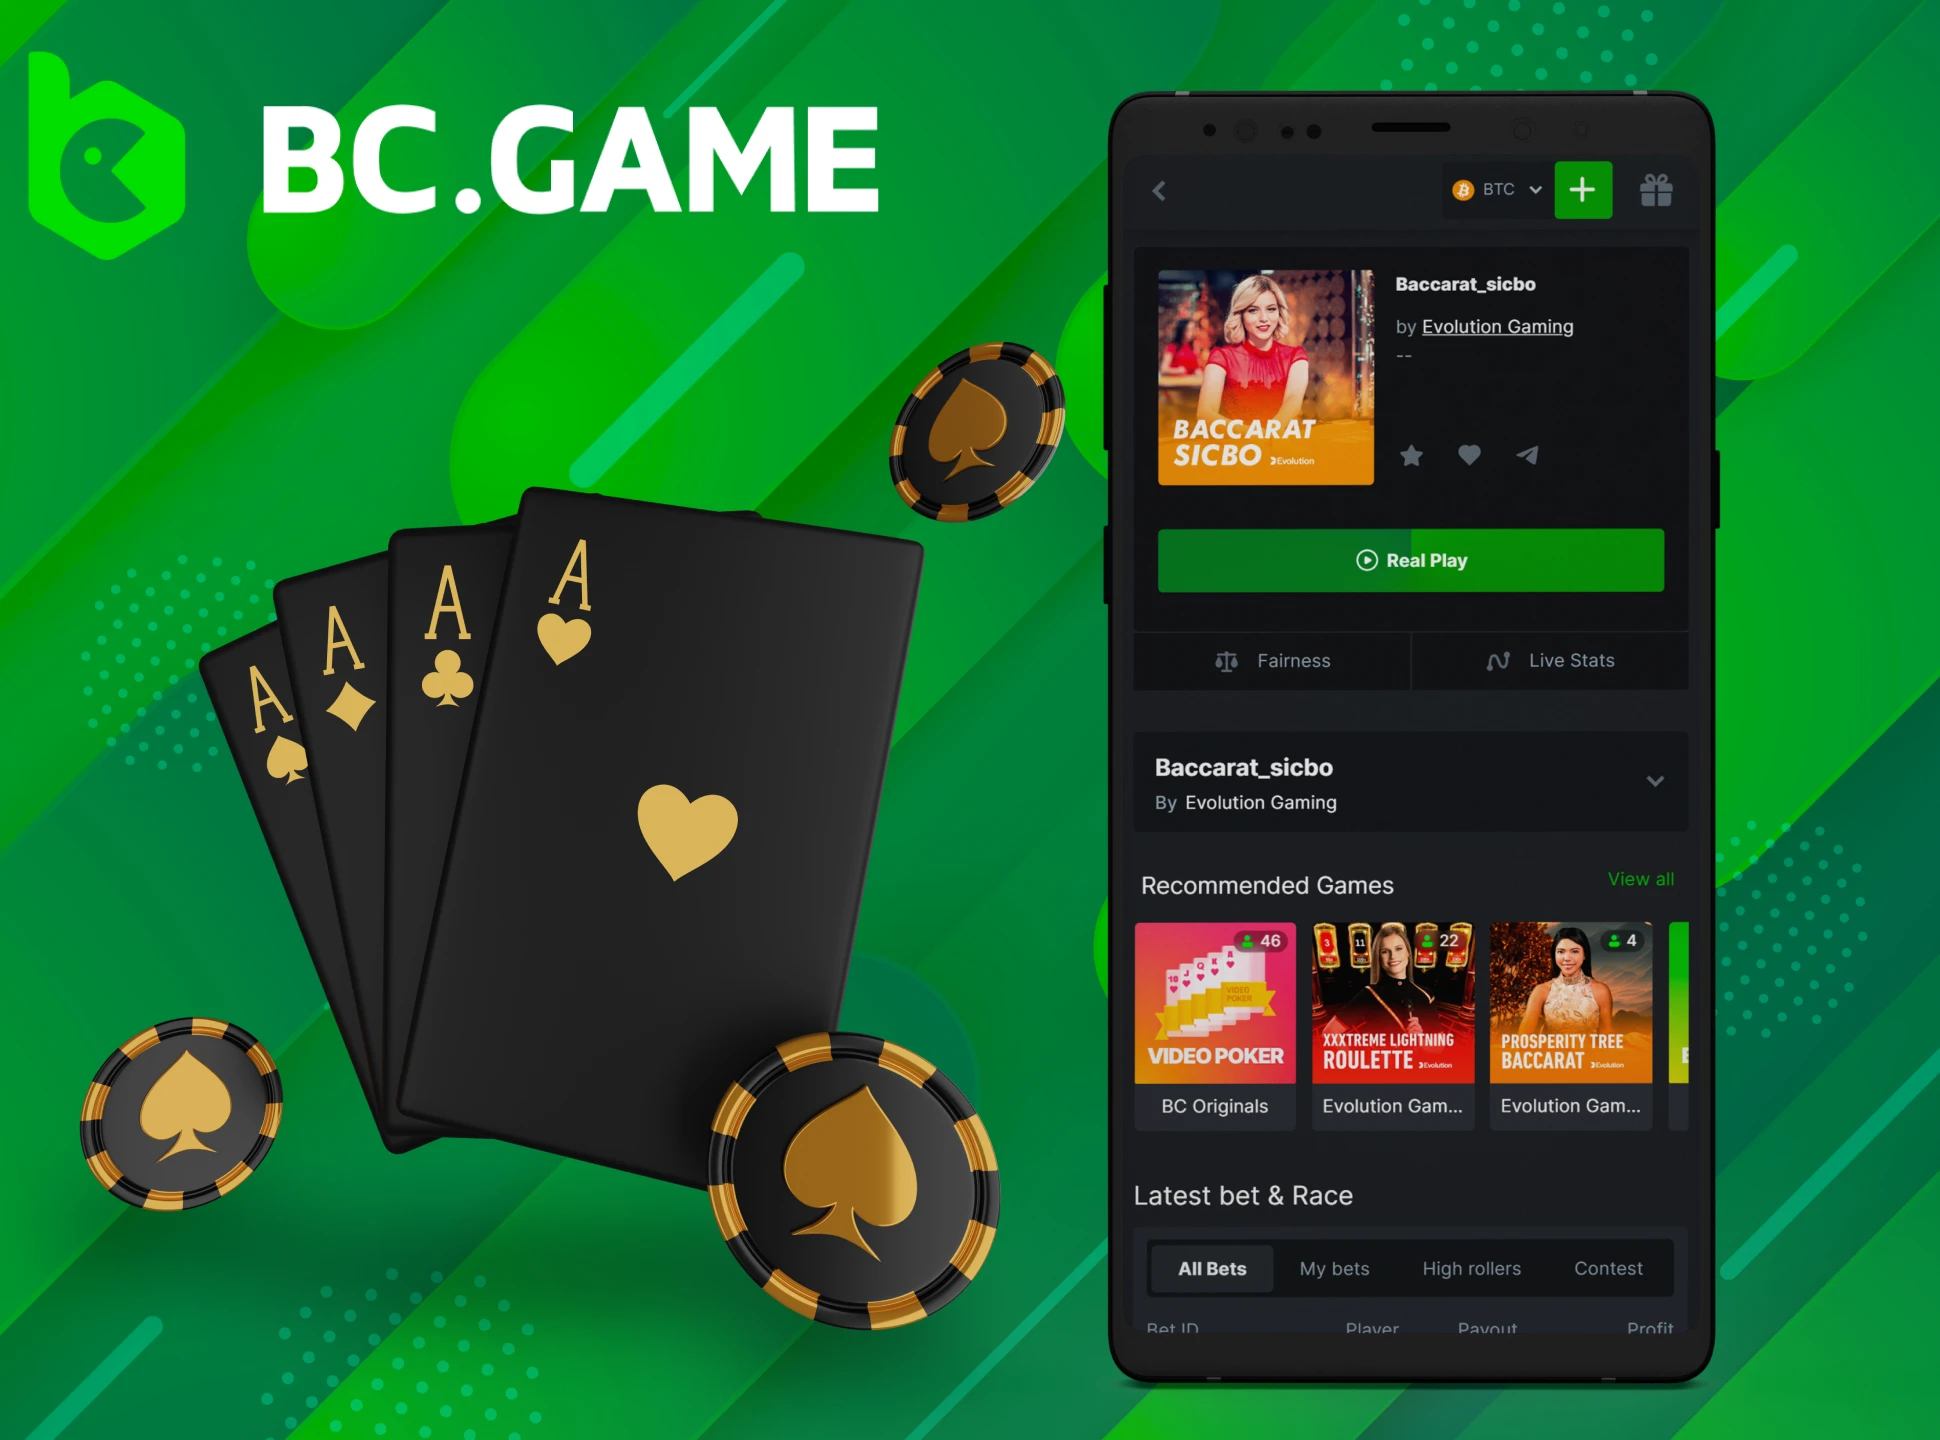 Play Live Baccarat on the BC Game app.